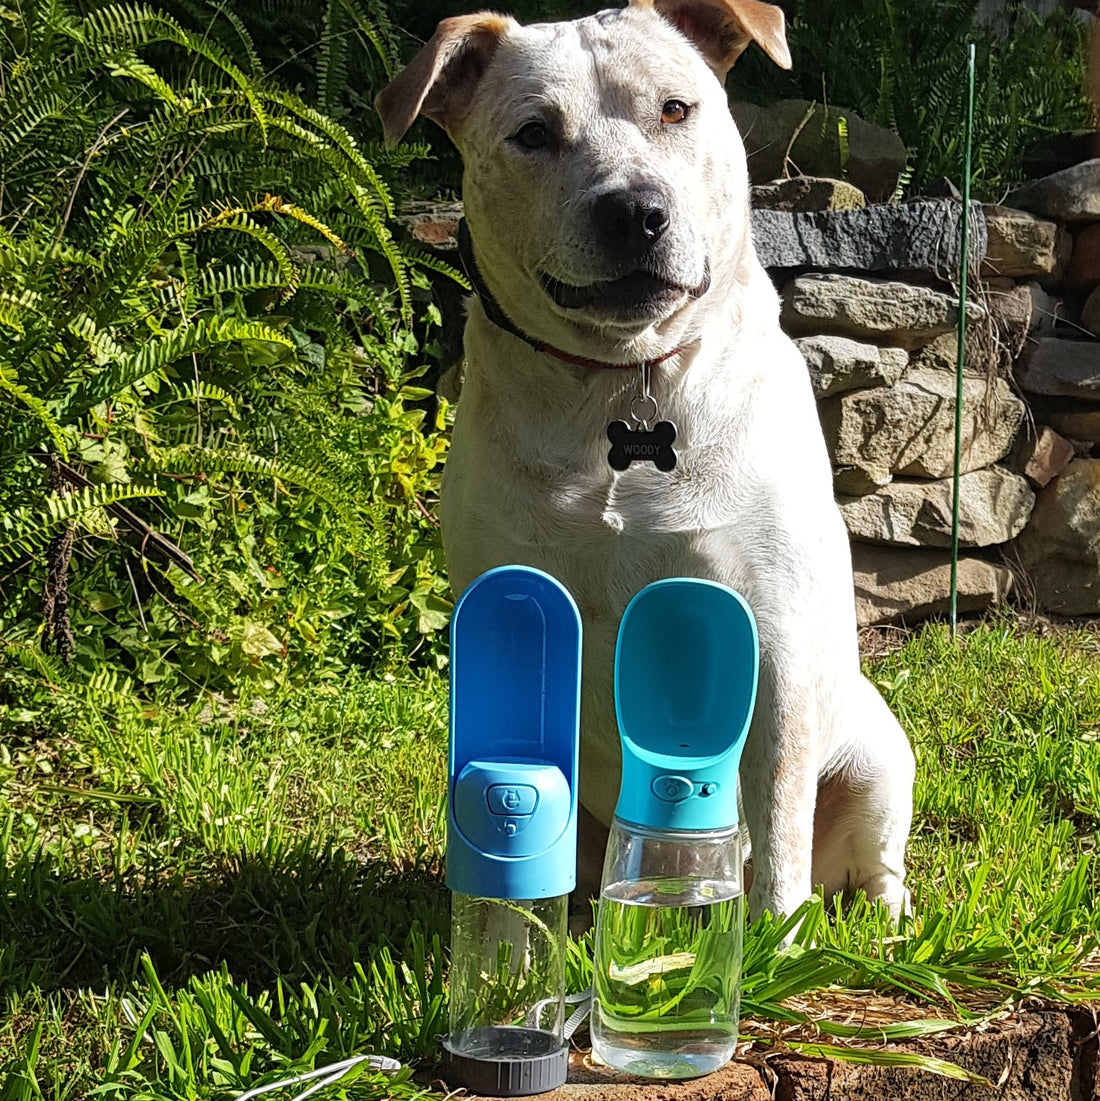 Dog with two dog water bottles including one extendable water bottle